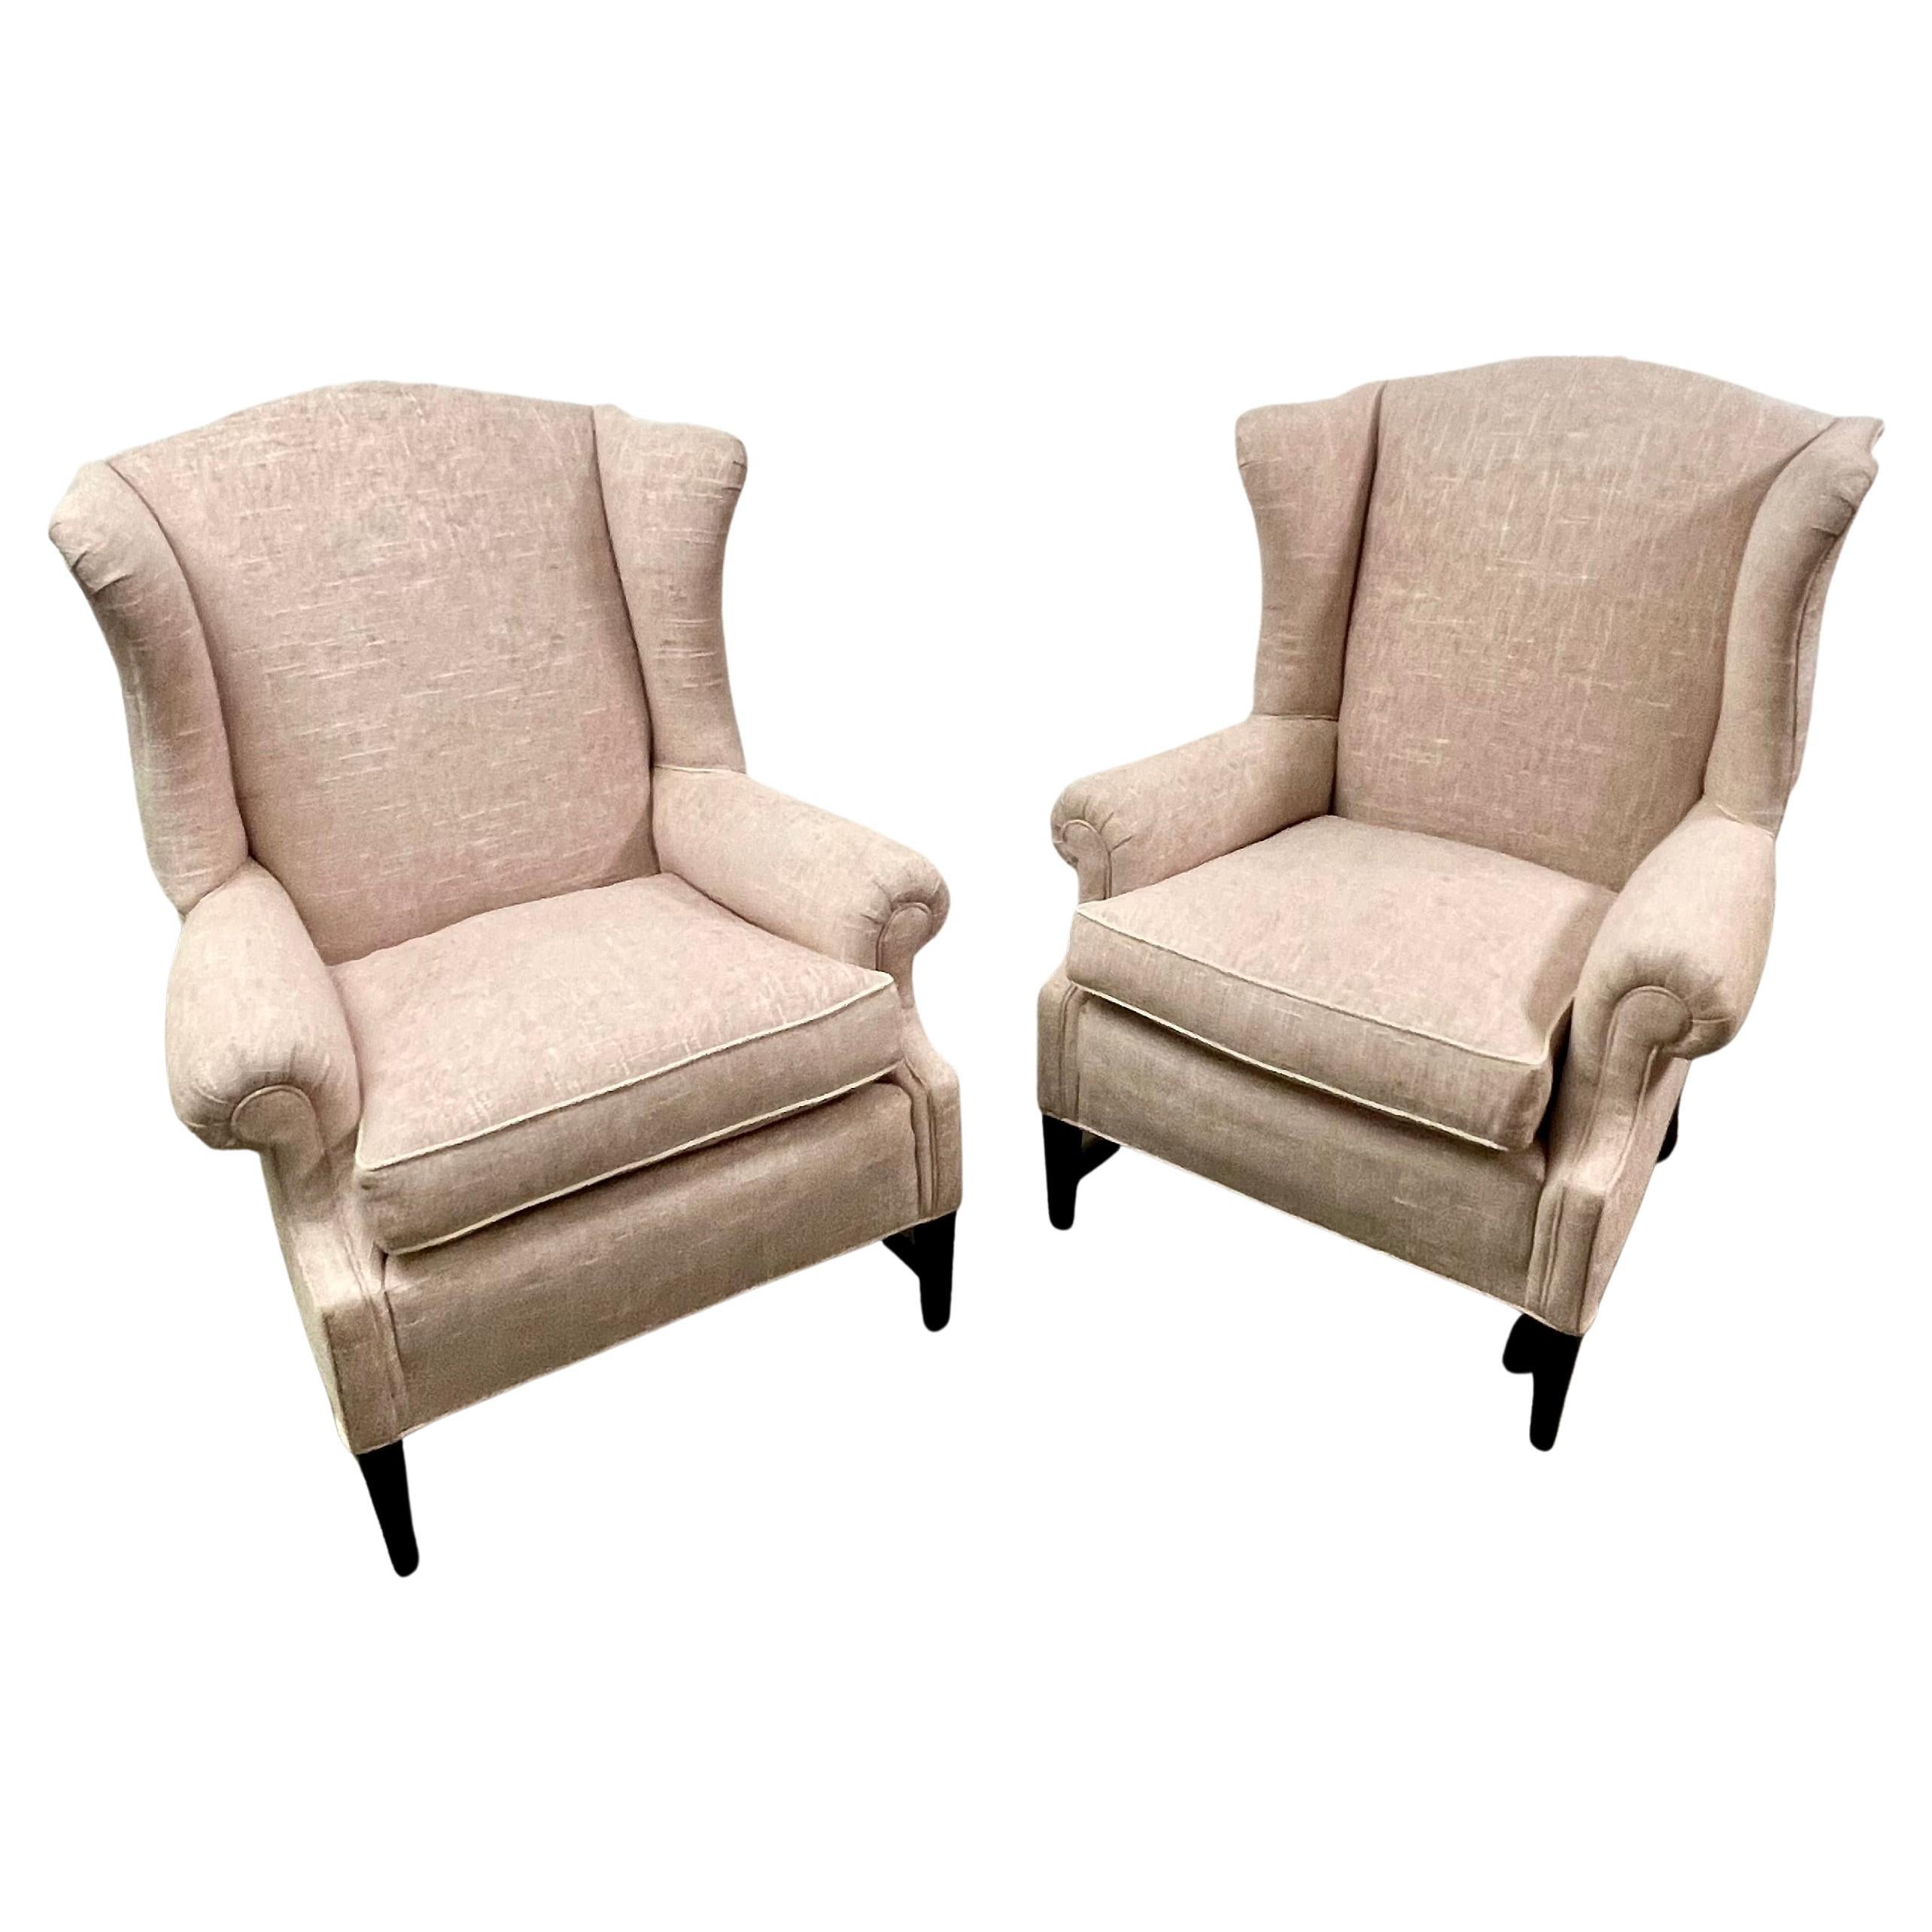 Pair of Georgian Style Wingback Chairs Upholstered in Linen For Sale